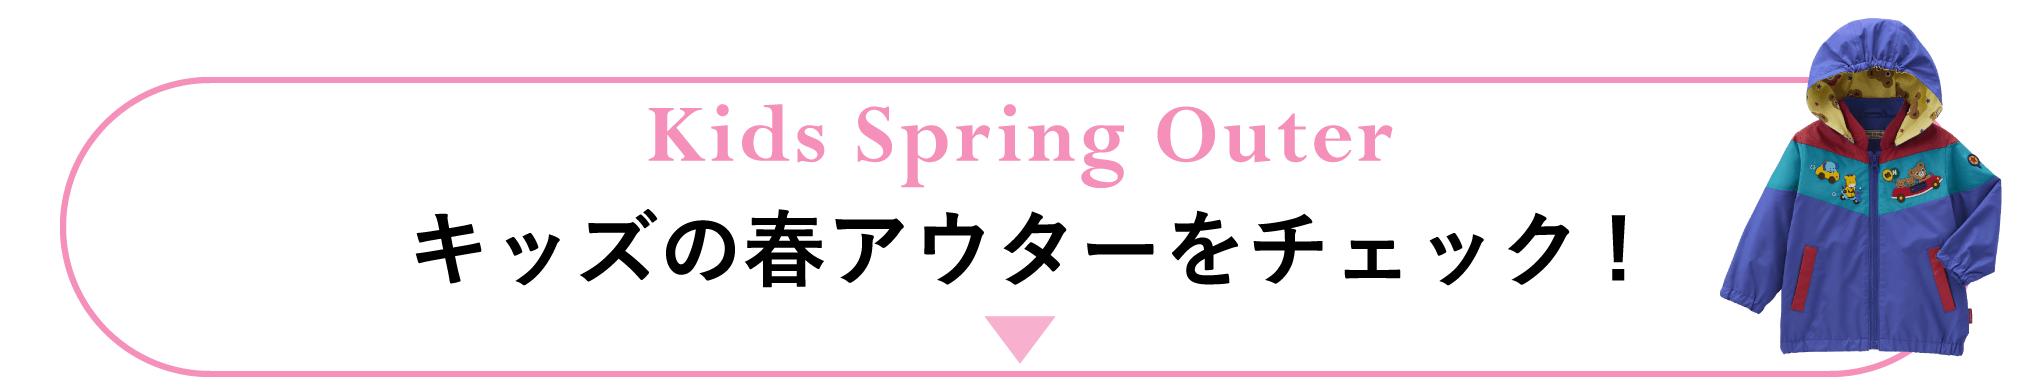 Kids Spring Outer: キッズの春アウターをチェック!